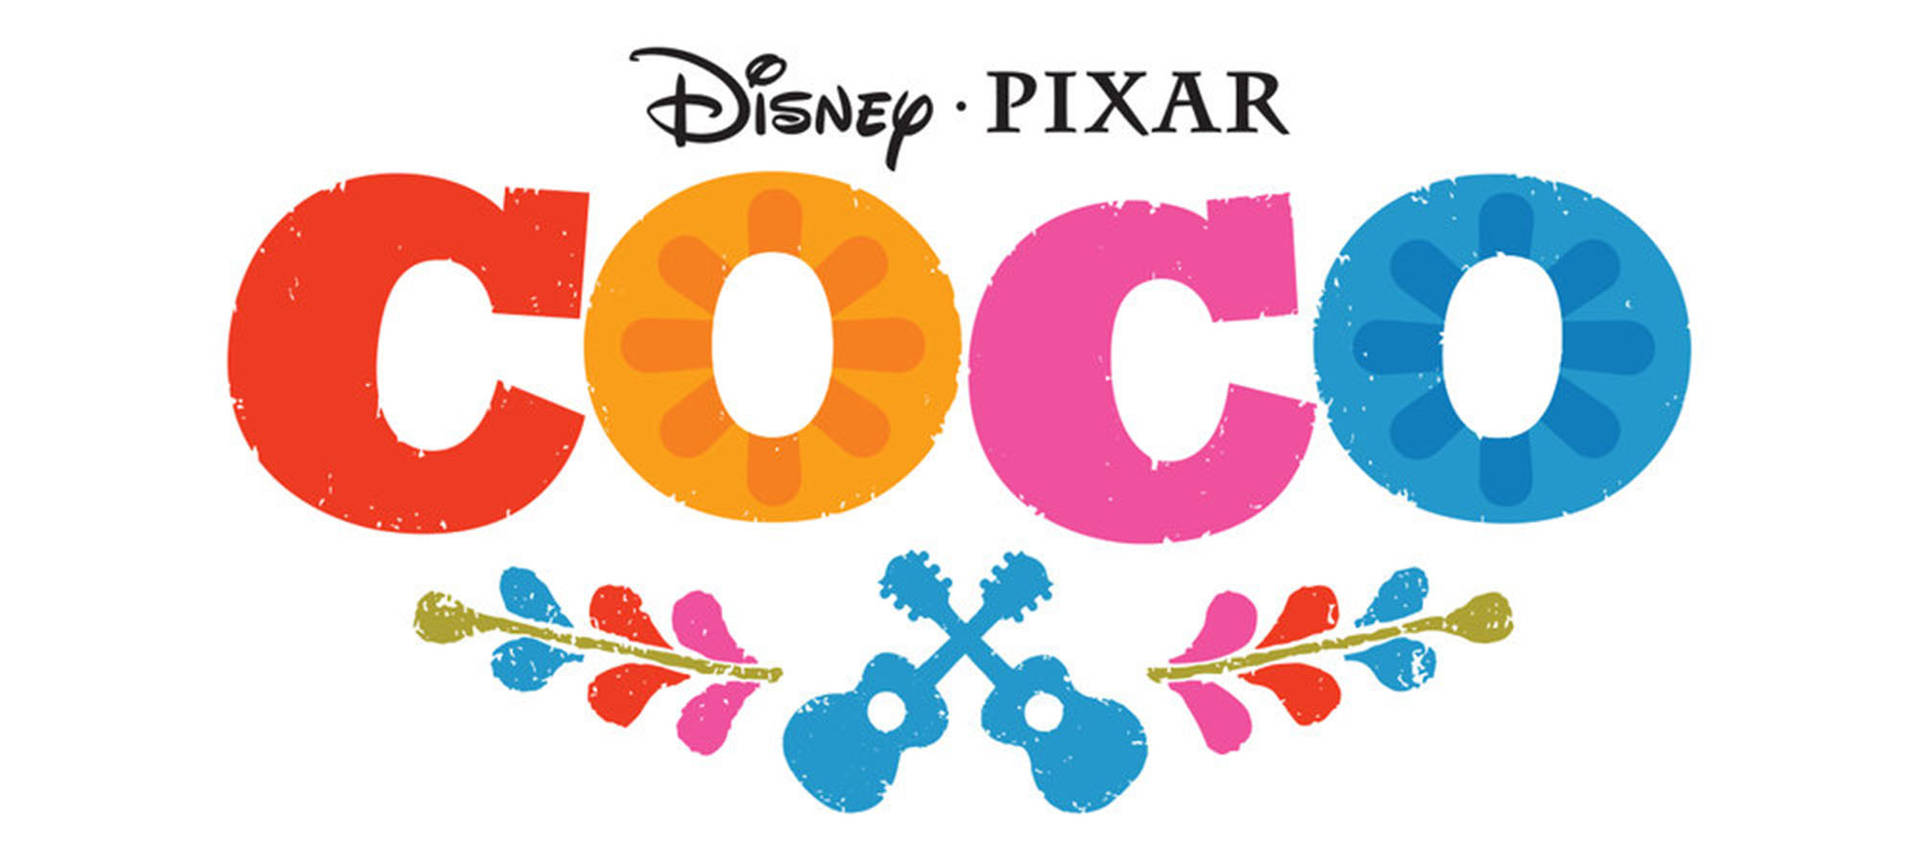 Coco Poster In White Background